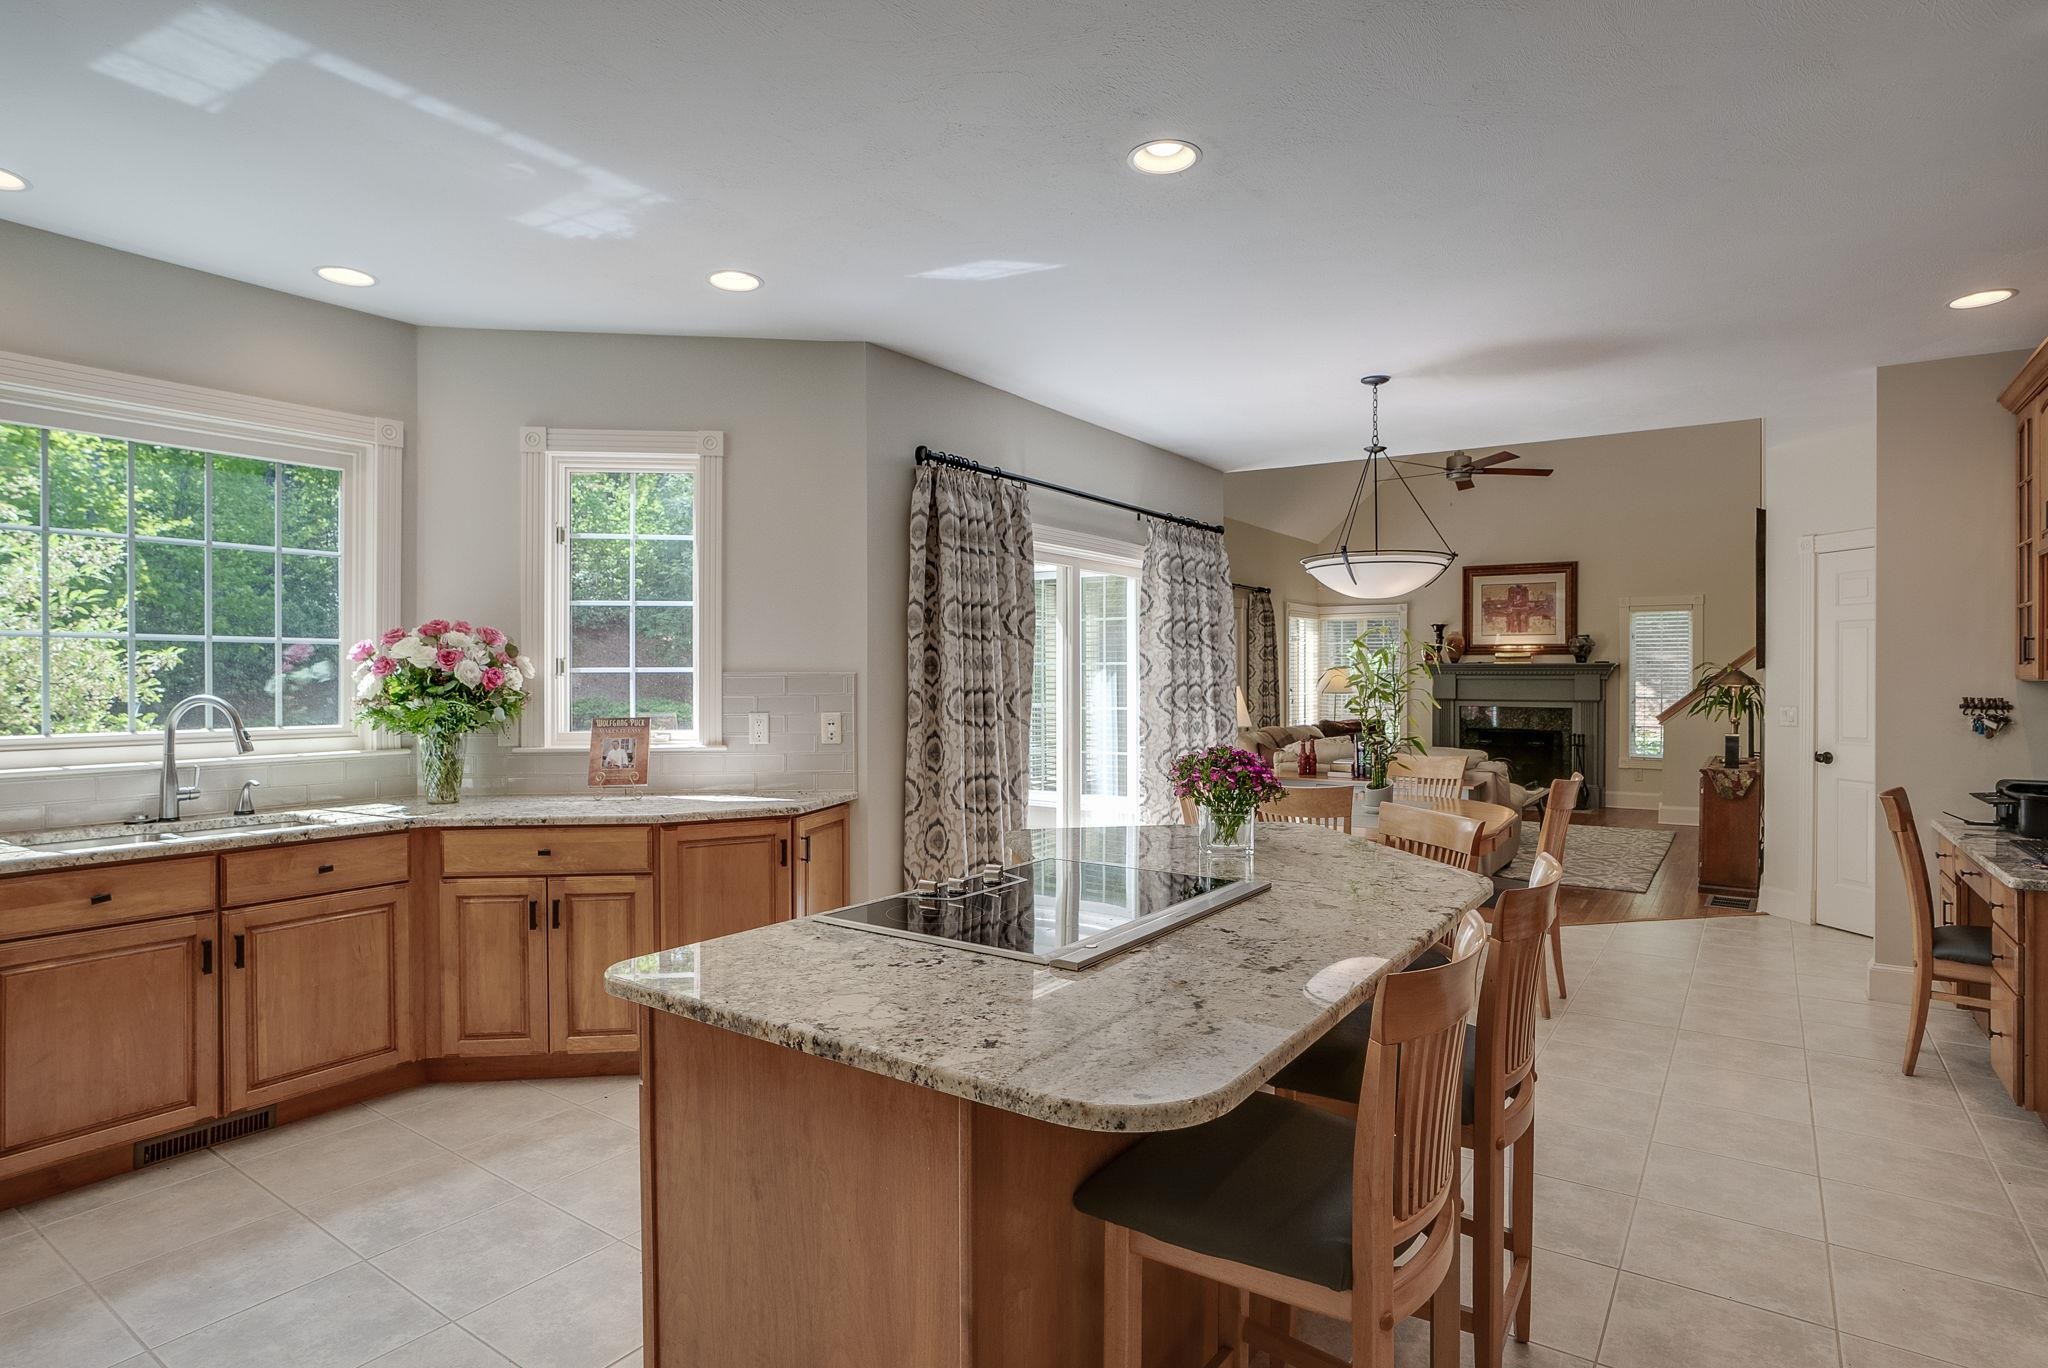 Center-Island Kitchen Perfect for Entertaining